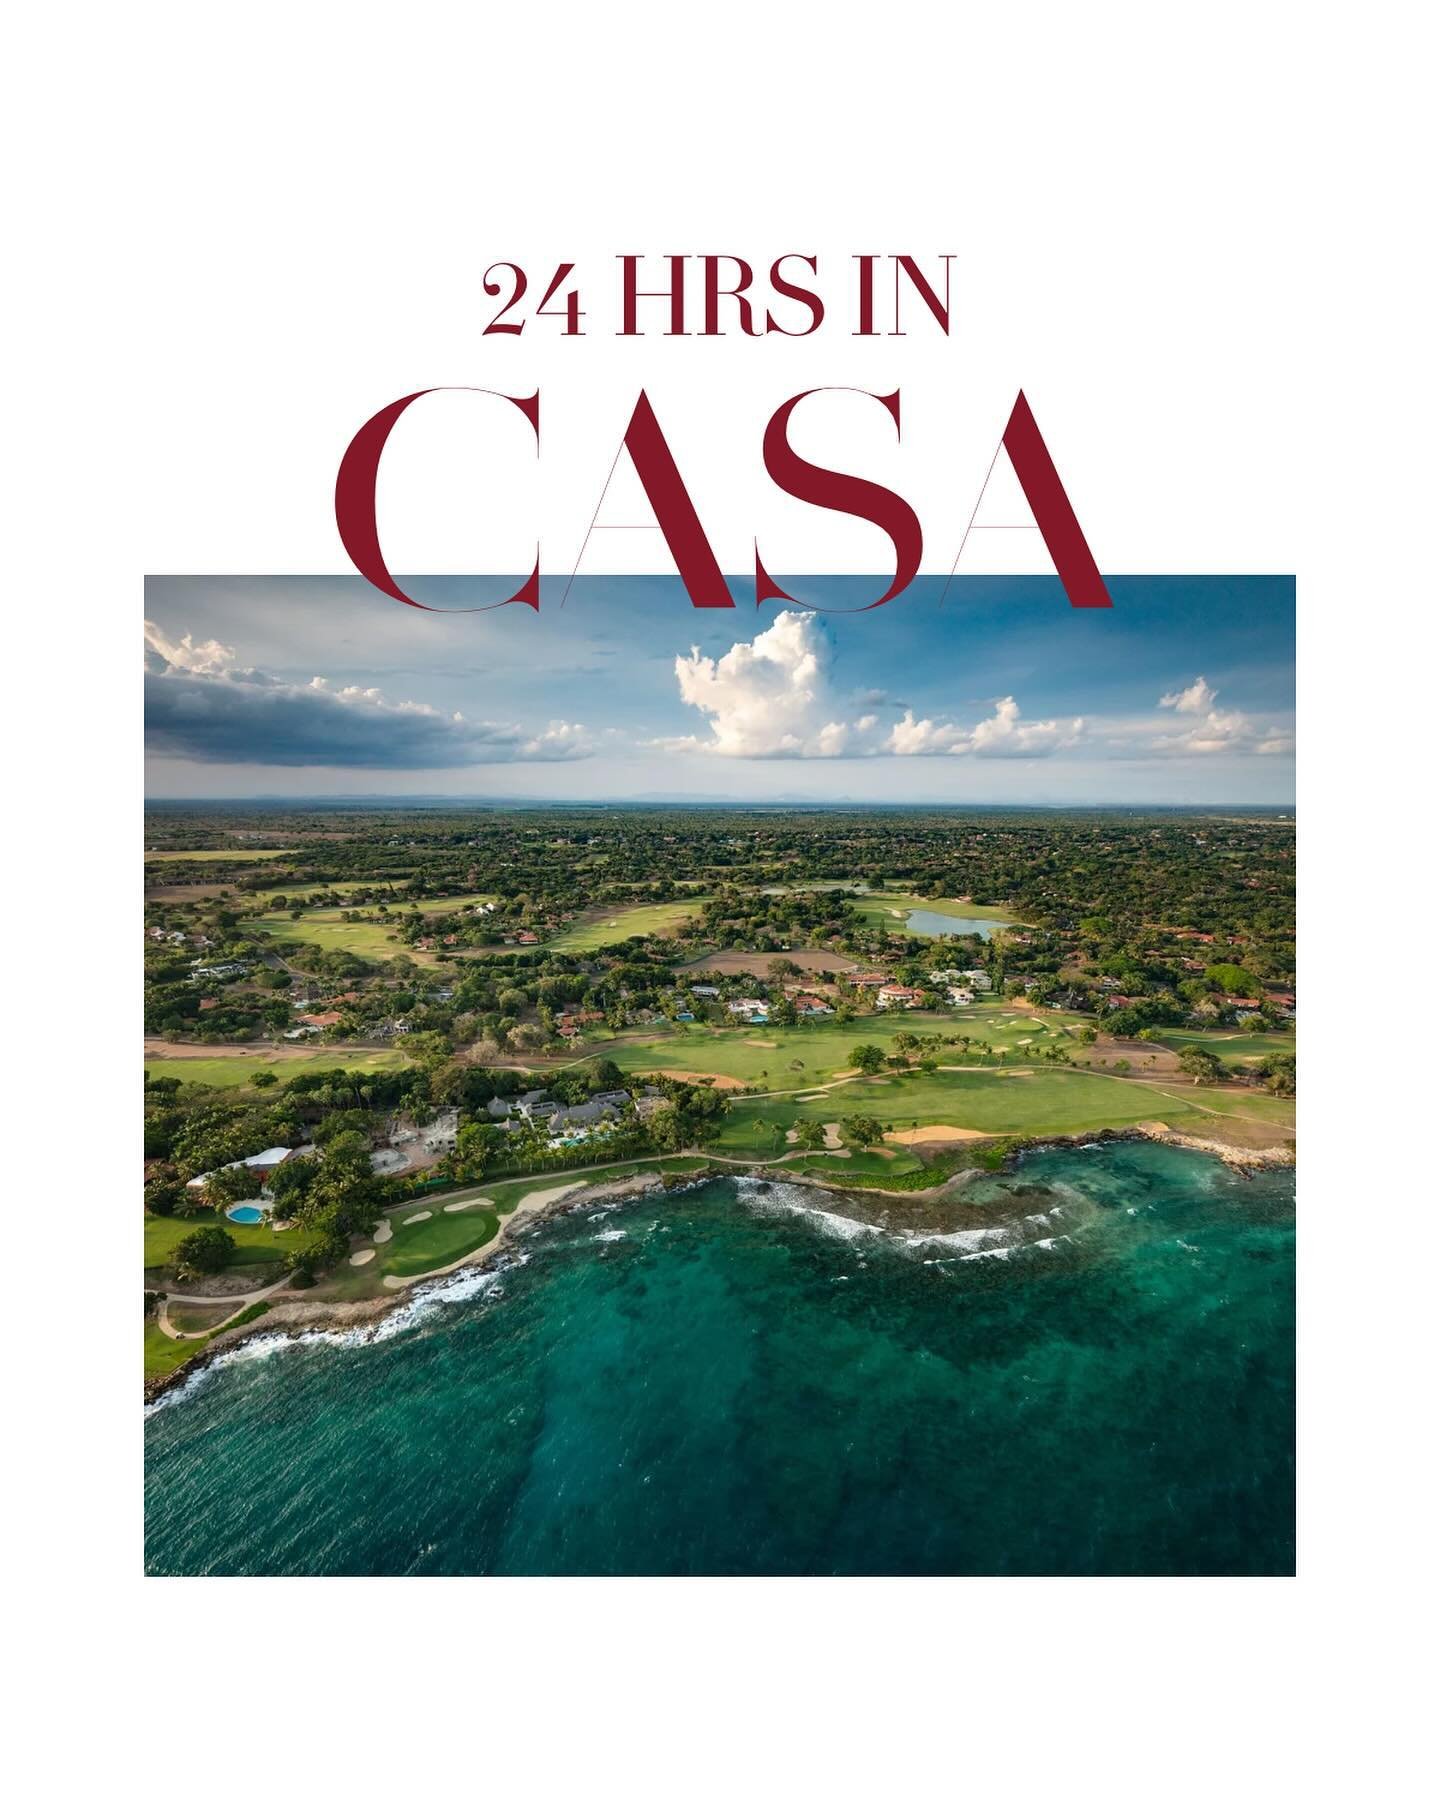 With natural wooden decor, golf courses overlooking the ocean &amp; Latin American flair, this tropical seaside resort should be your next cold weather getaway.🌴

For the full guide, visit our website in the link in bio.